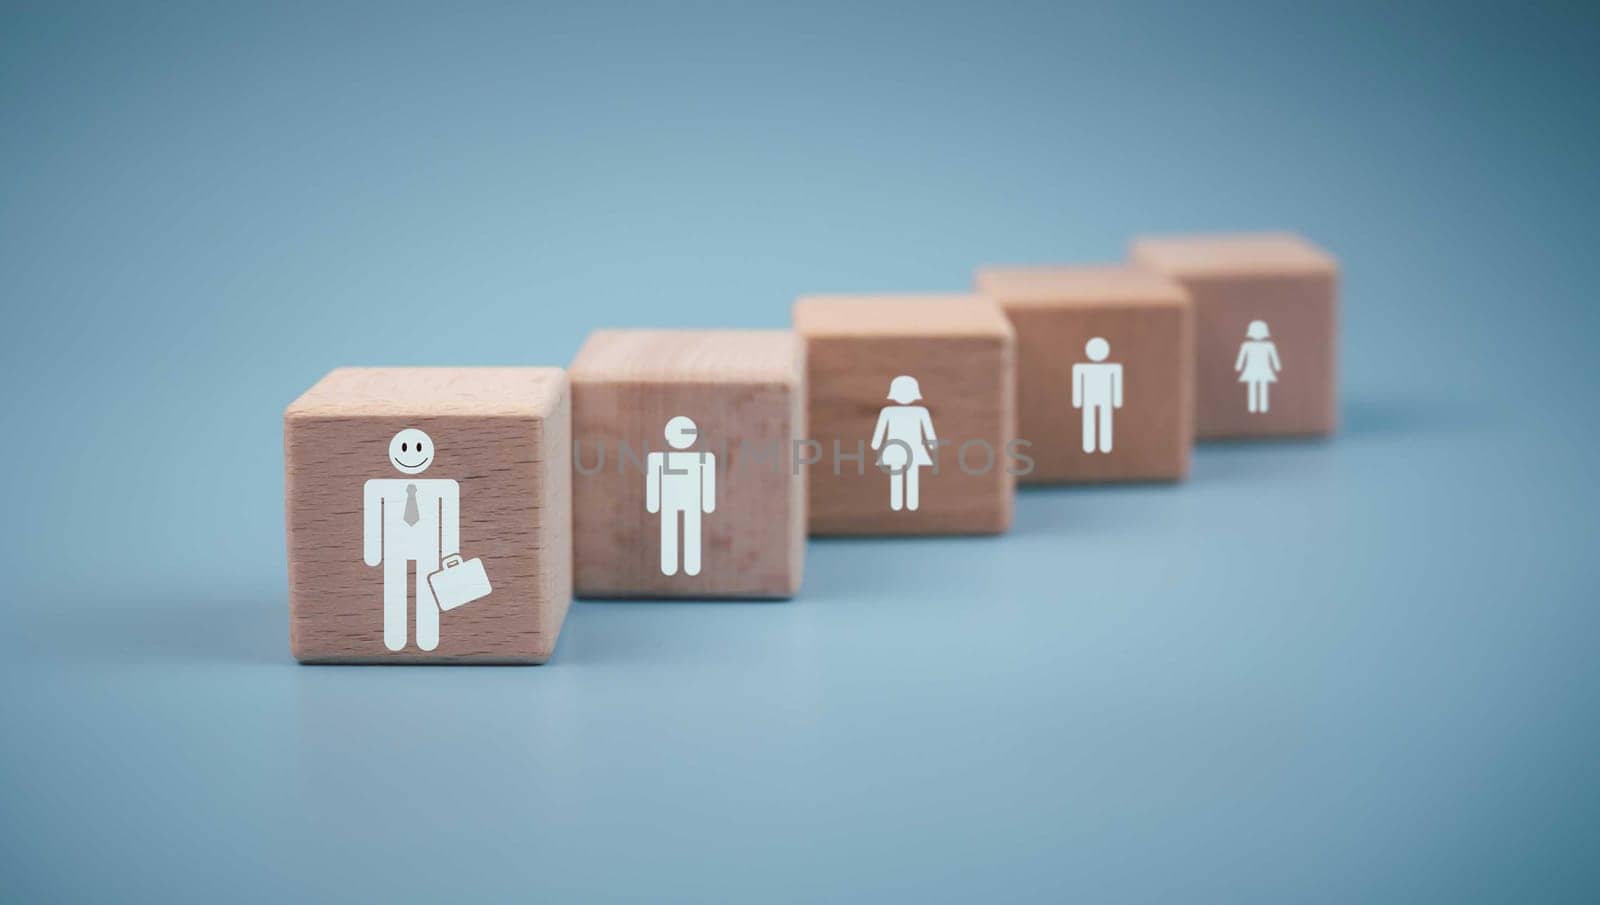 Concept Business and HR for leadership and team leader, one wooden dolls different and stand out from the group.